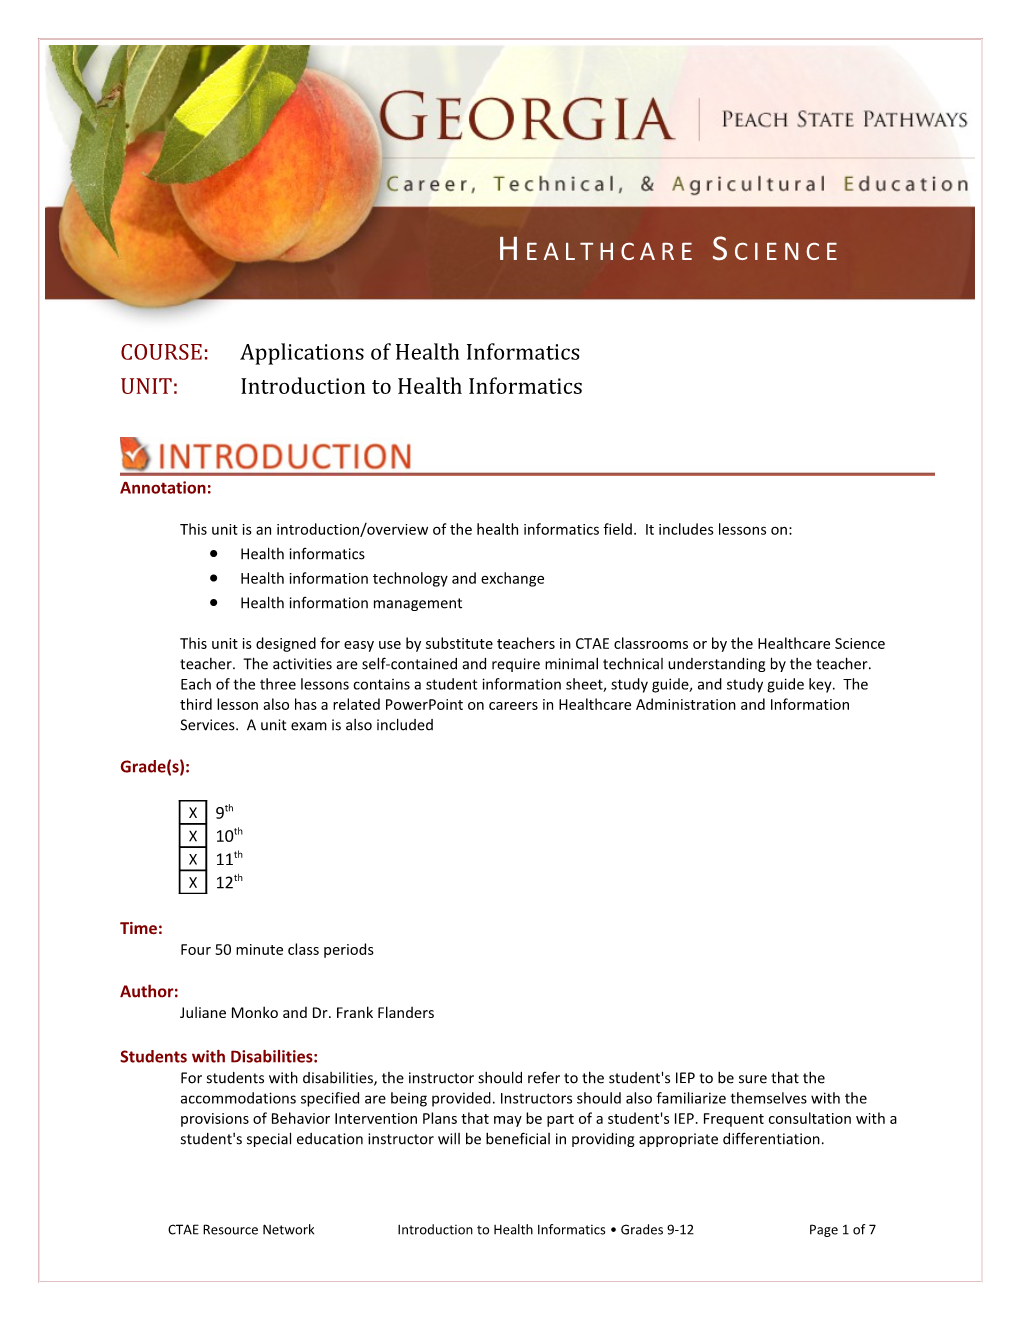 COURSE: Applications of Health Informatics